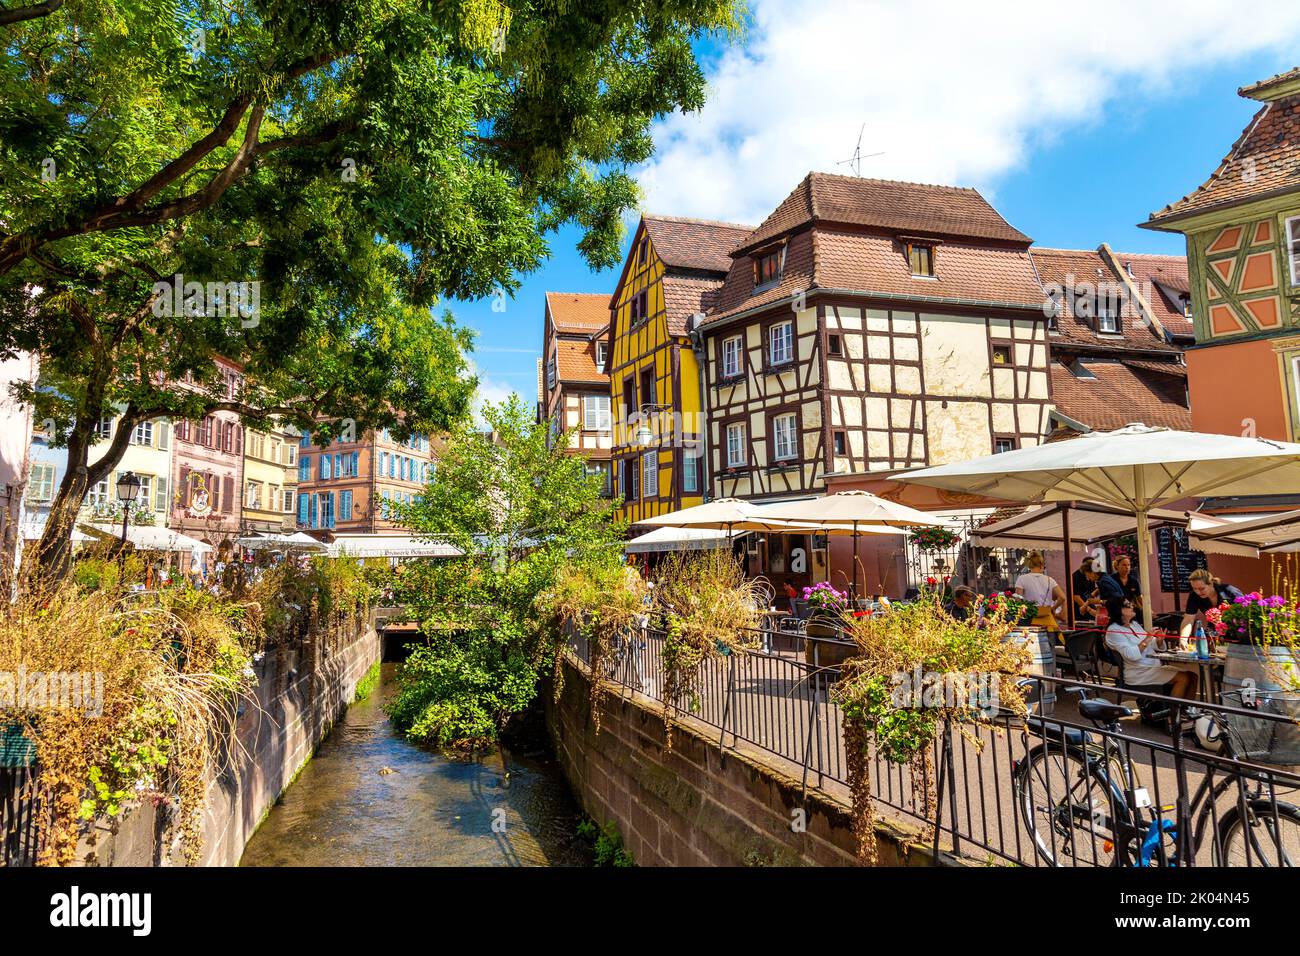 Timber-framed wooden houses along the canal at Place de l'Ancienne-Douane in the medieval town of Colmar, Alsace, France Stock Photo